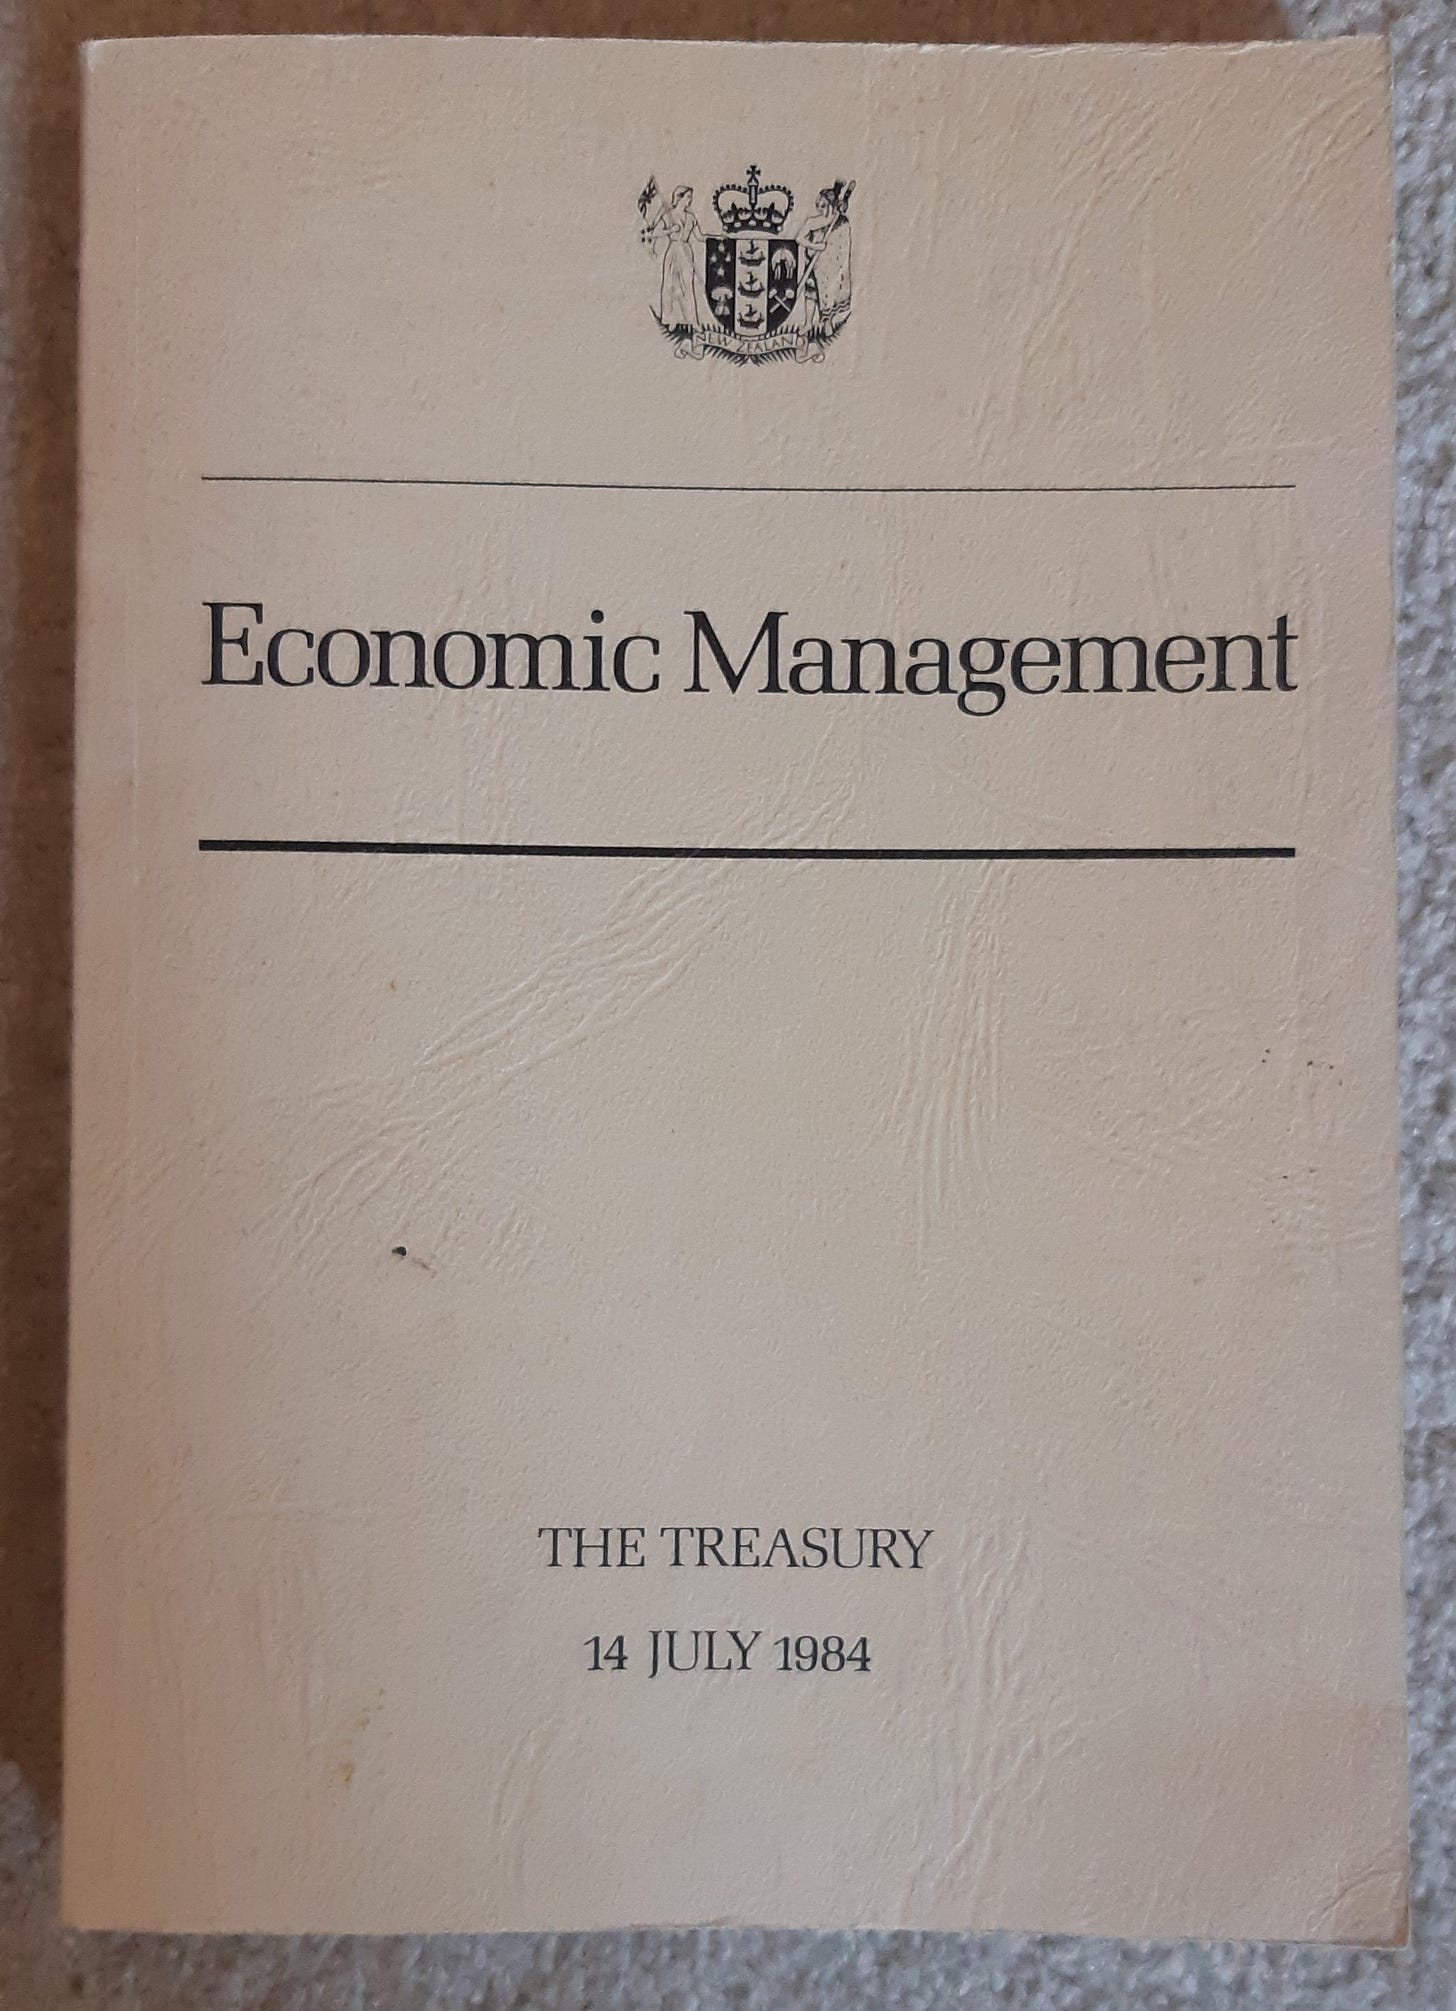 Photo of cover page of Treasury's 1984 Briefing to Income Minister titled "Economic Management"